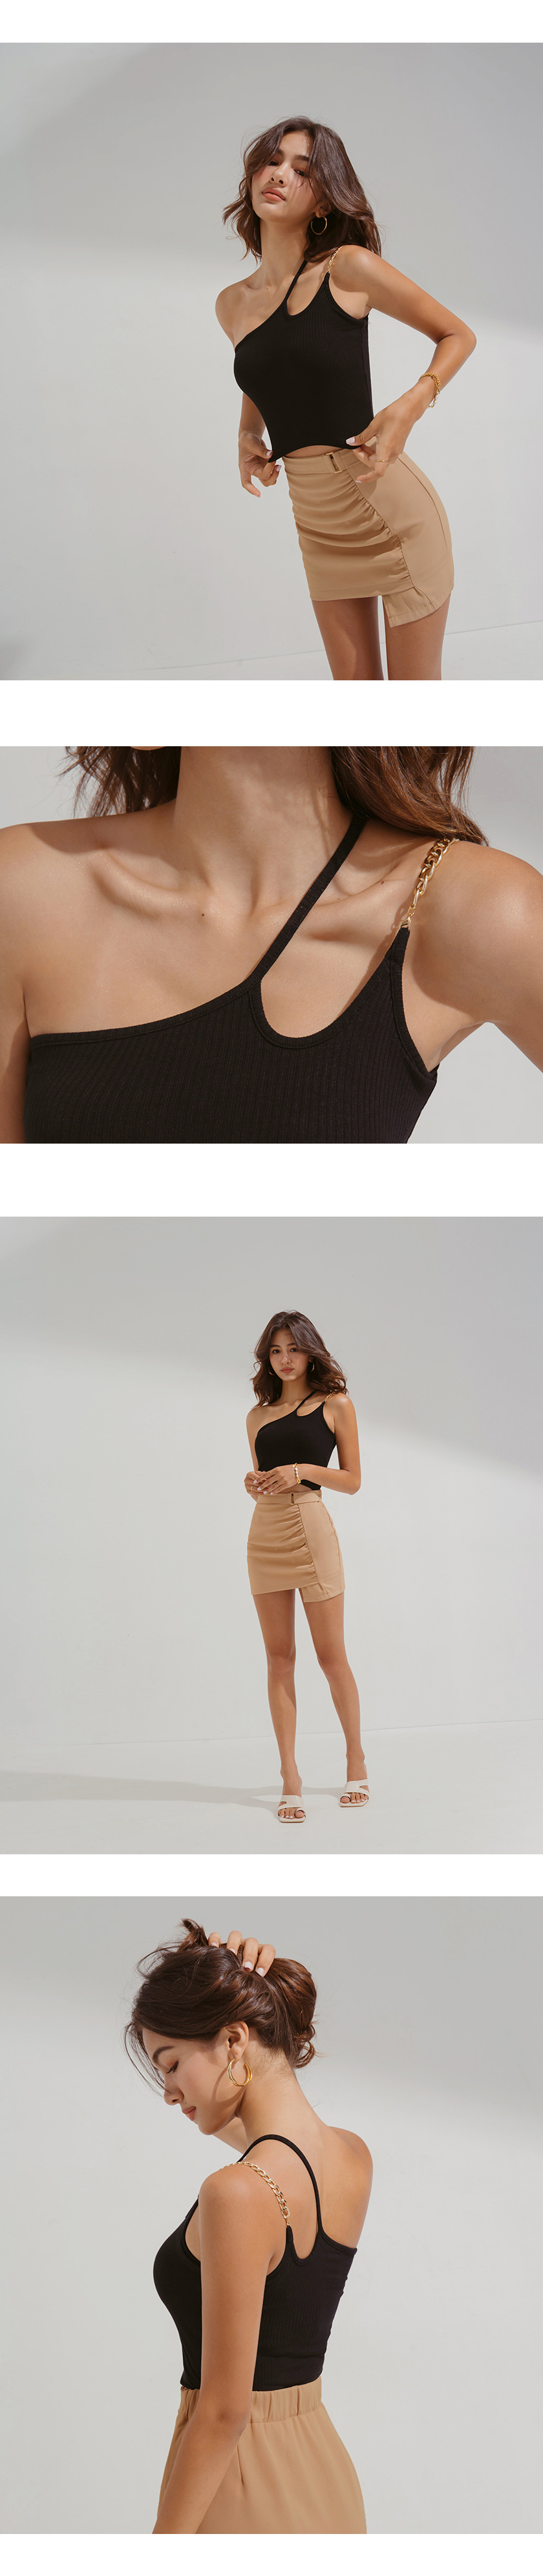 Air Cool 2.0】 Zero-Wearing Comfortable Breasts One-Shoulder Gold Chain Bra  Top - AIR SPACE